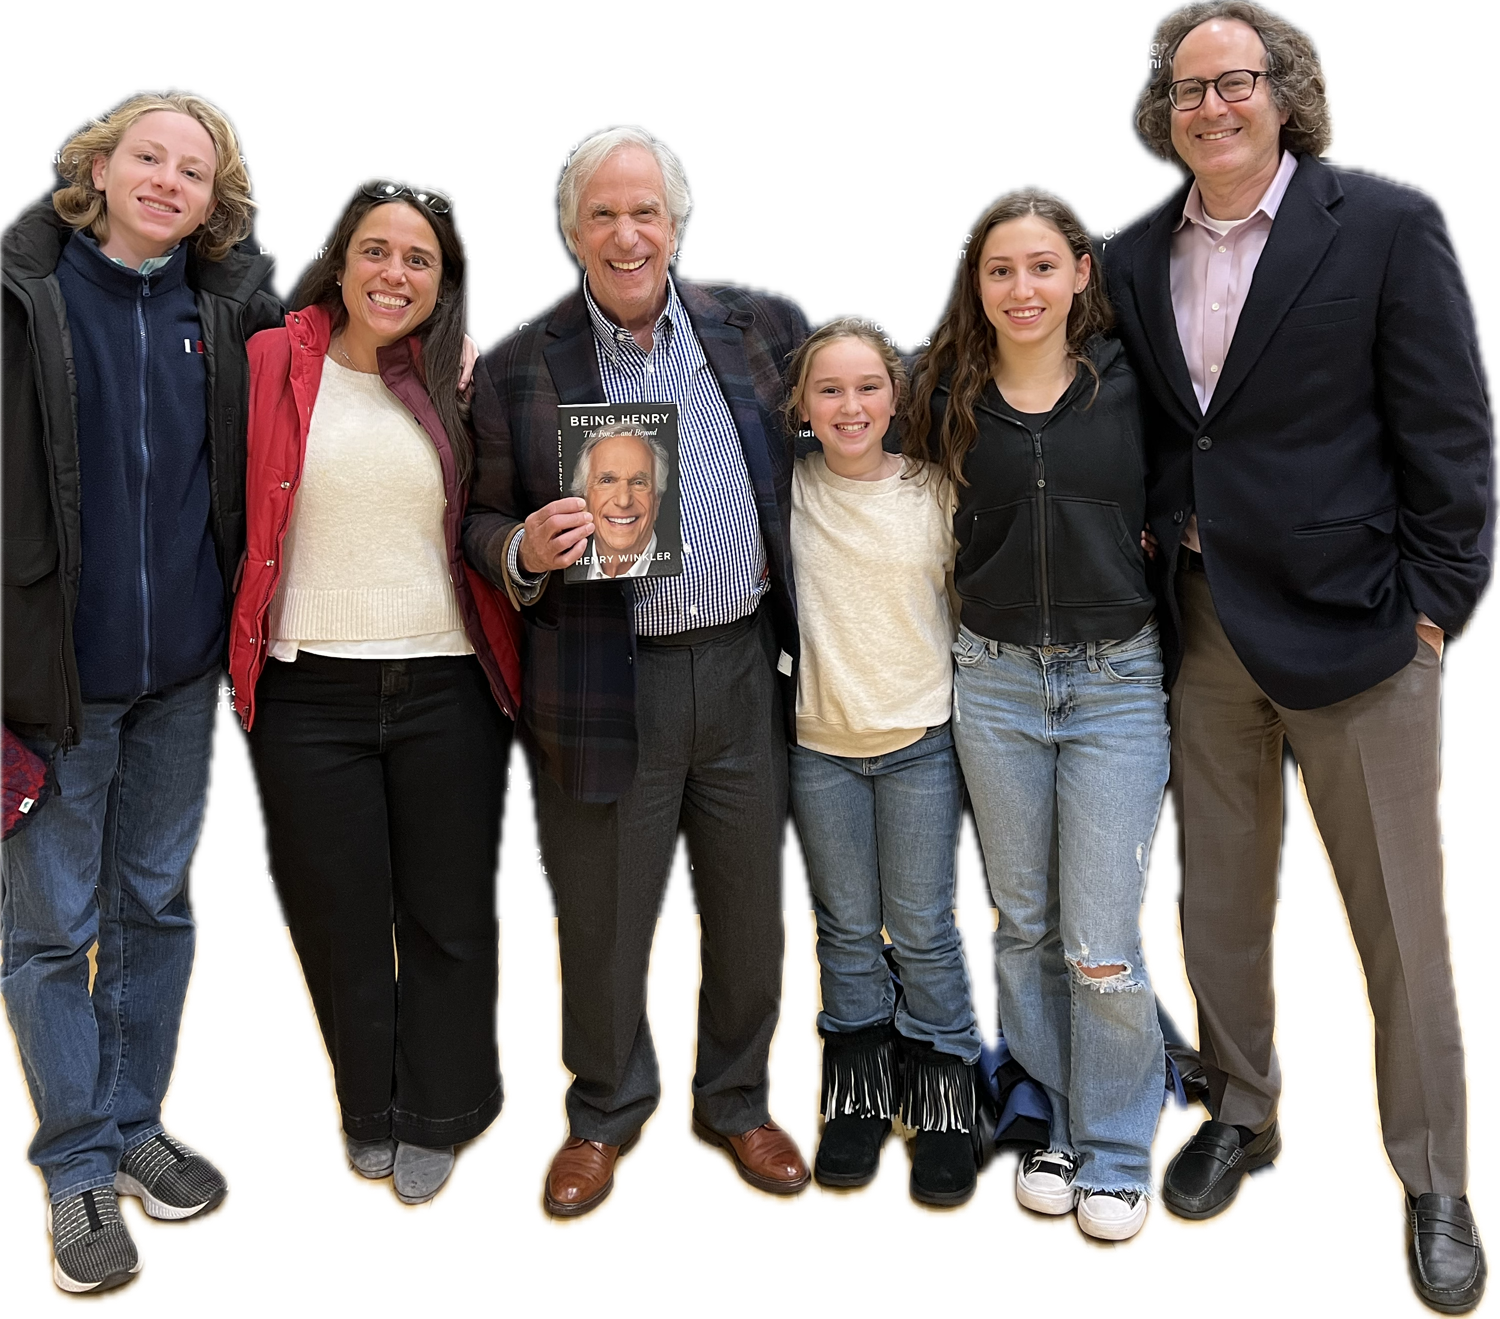 a fertility doctor, his family and the Fonz